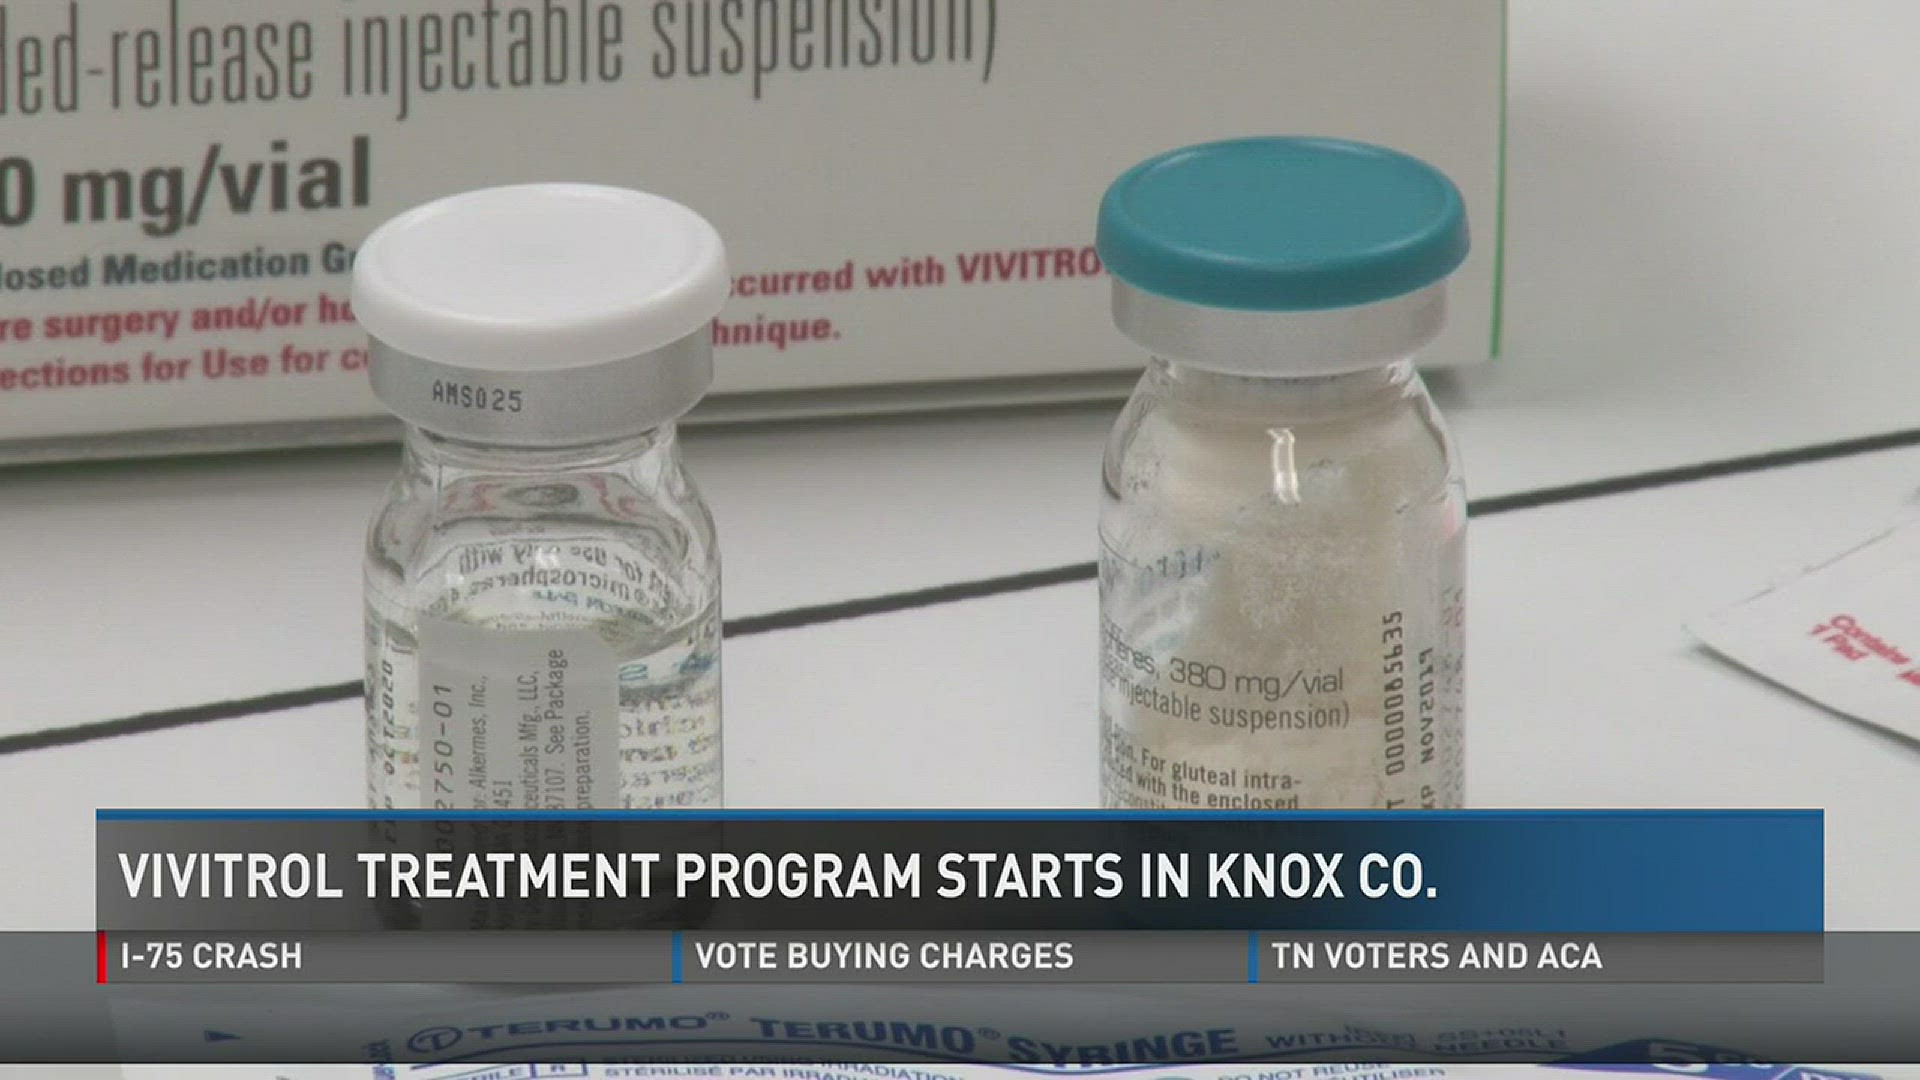 Feb. 27, 2017: A select group of nonviolent offenders at the Knox County jail are now getting Vivitrol injections. The drug takes away cravings and prevents the user from getting high on opiates.